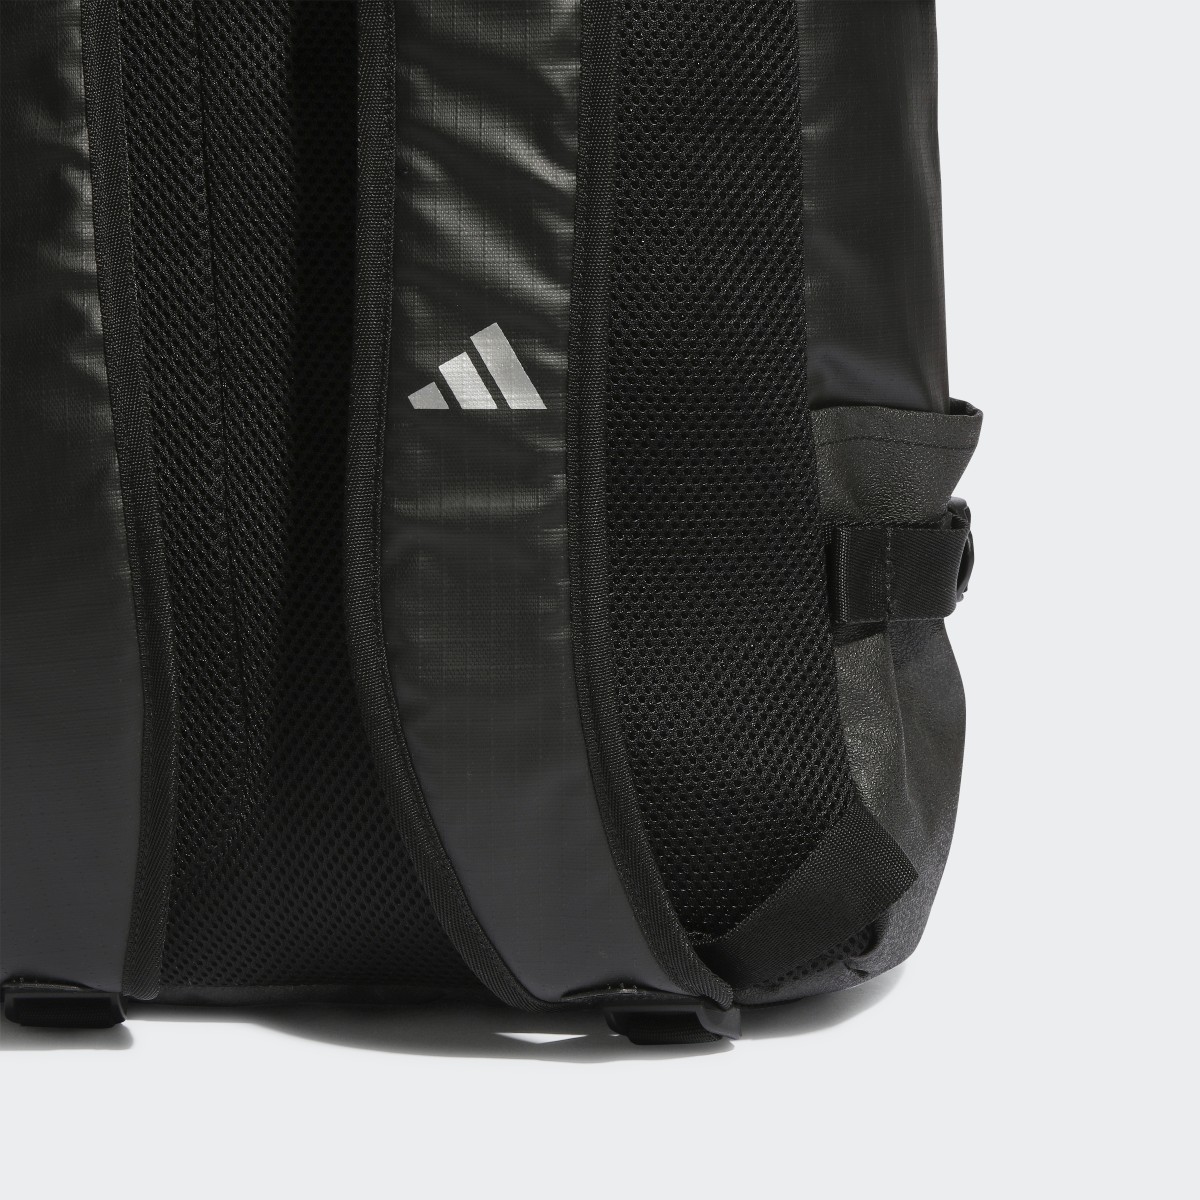 Adidas 4ATHLTS ID Gear Up Backpack. 6